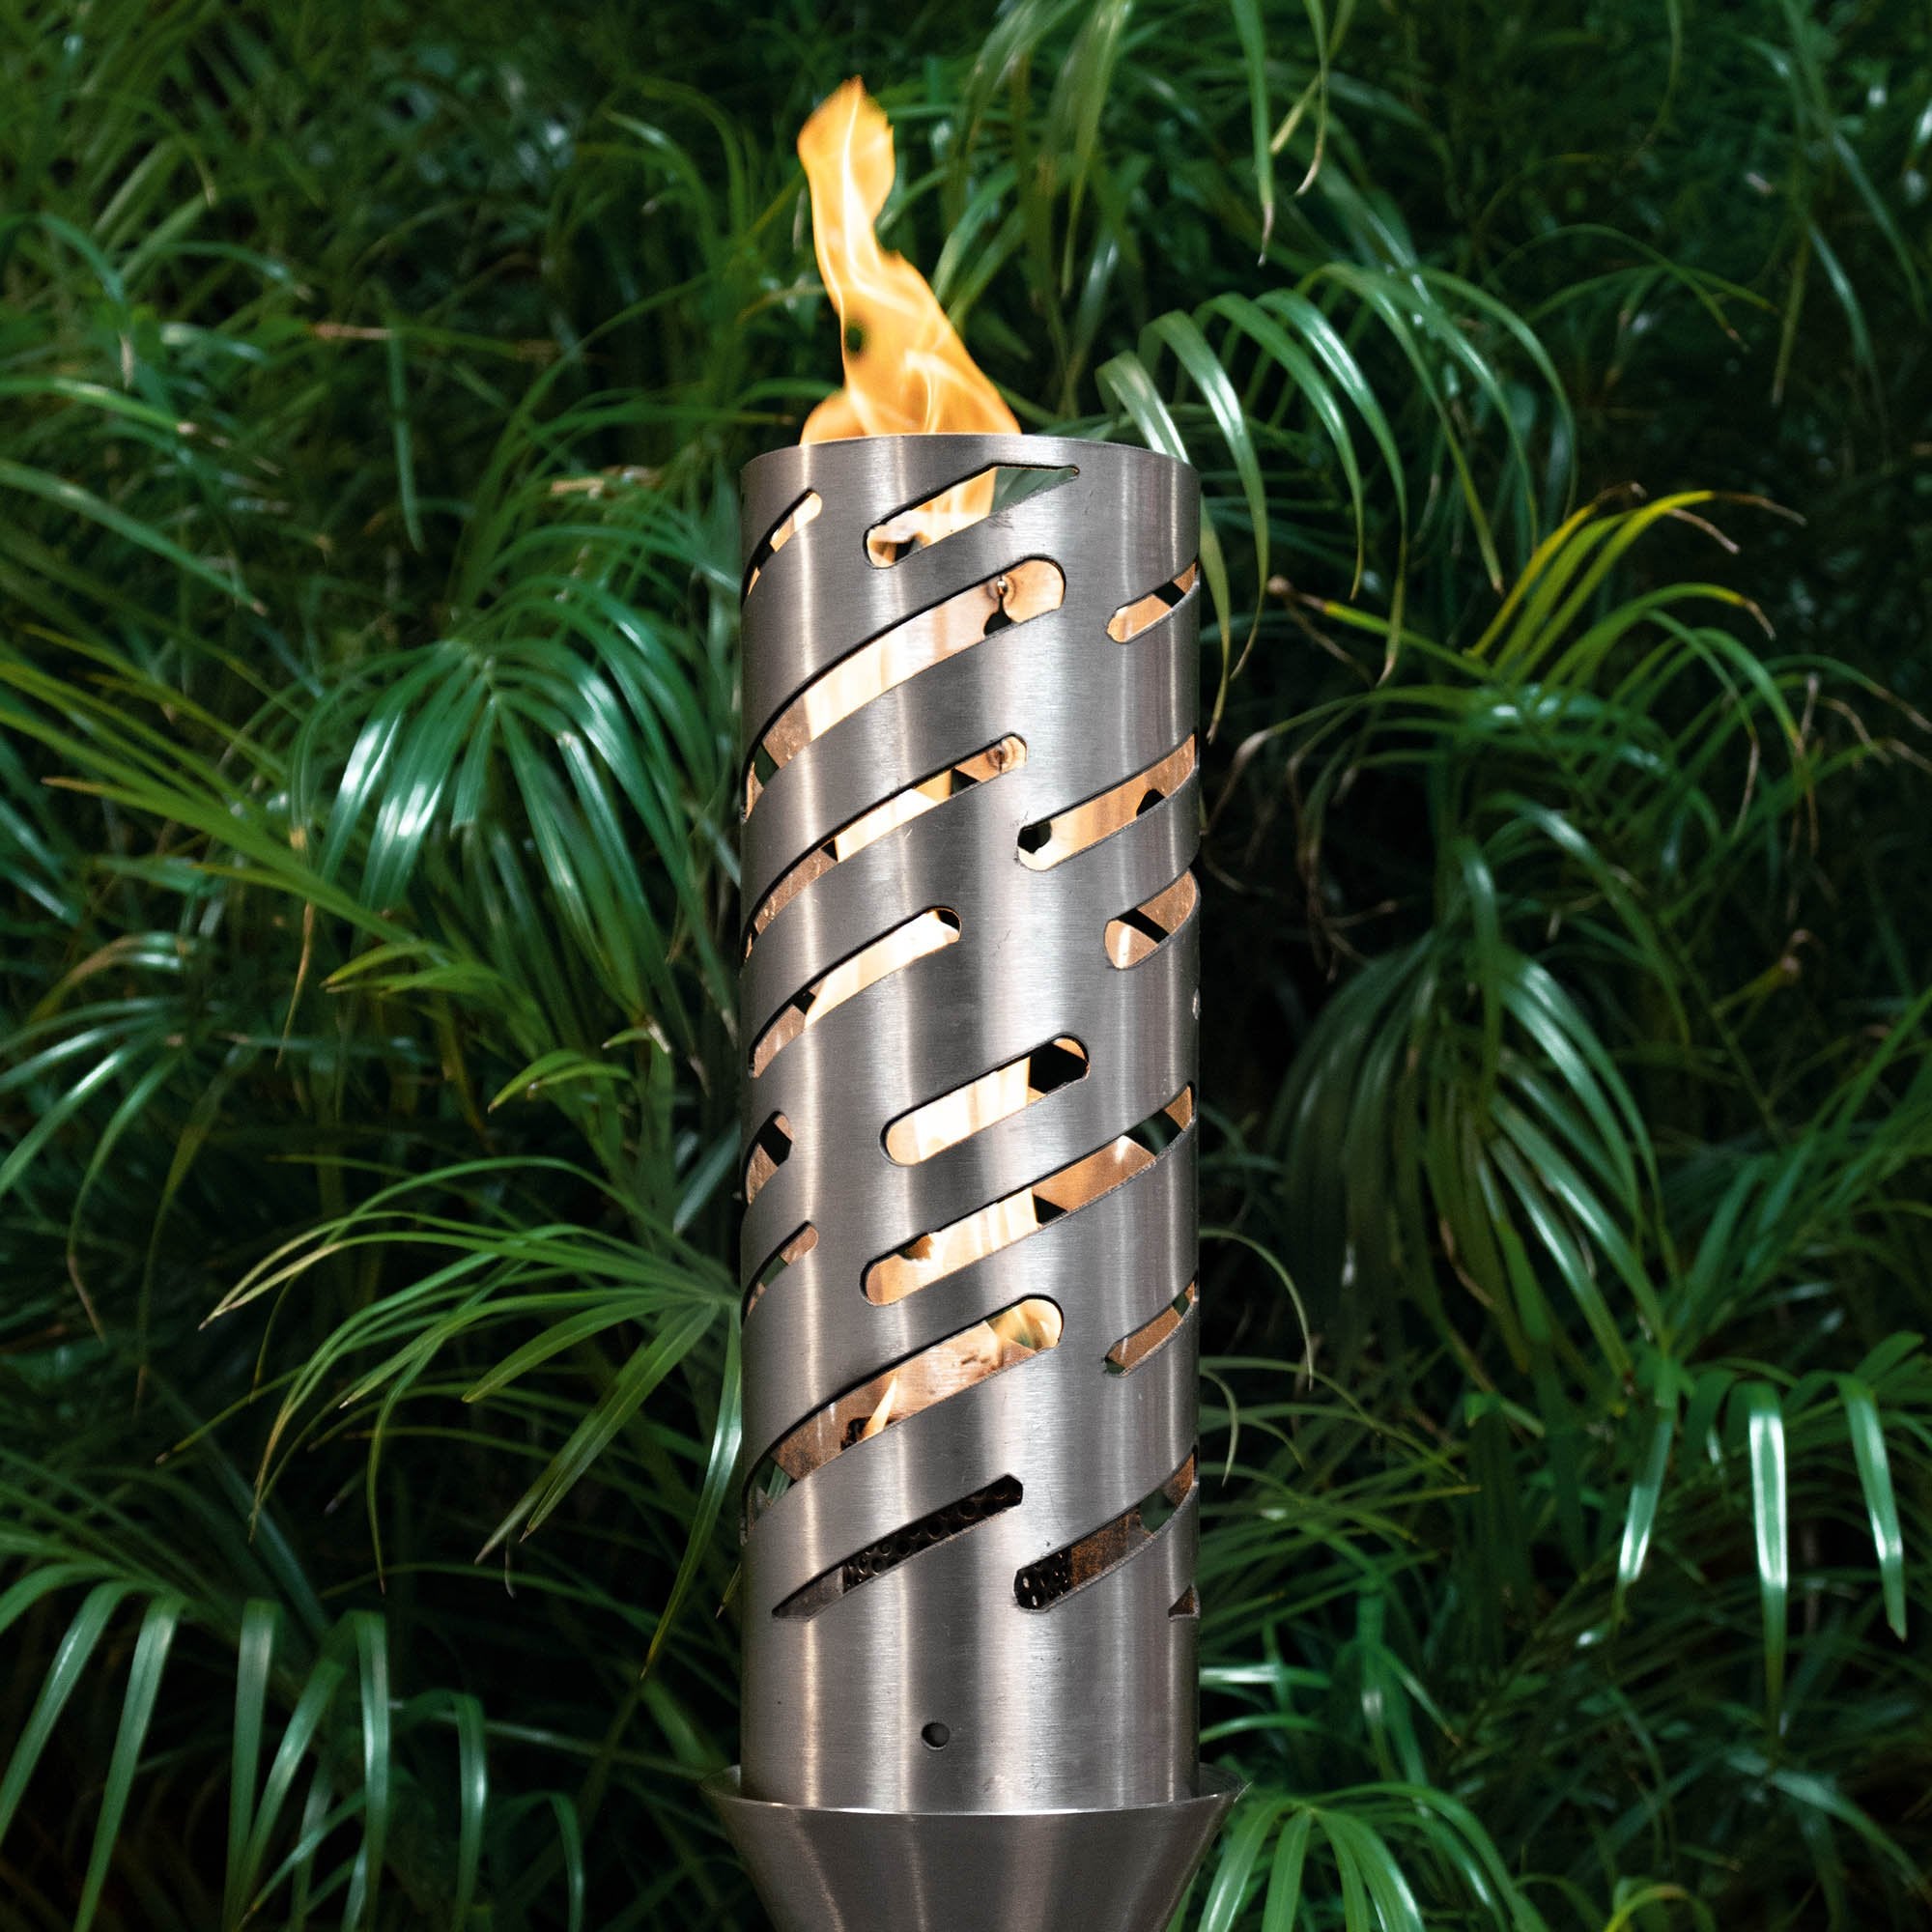 TOP FIRES SHOOTING STAR Fire Torch 14" in Stainless Steel - Majestic Fountains